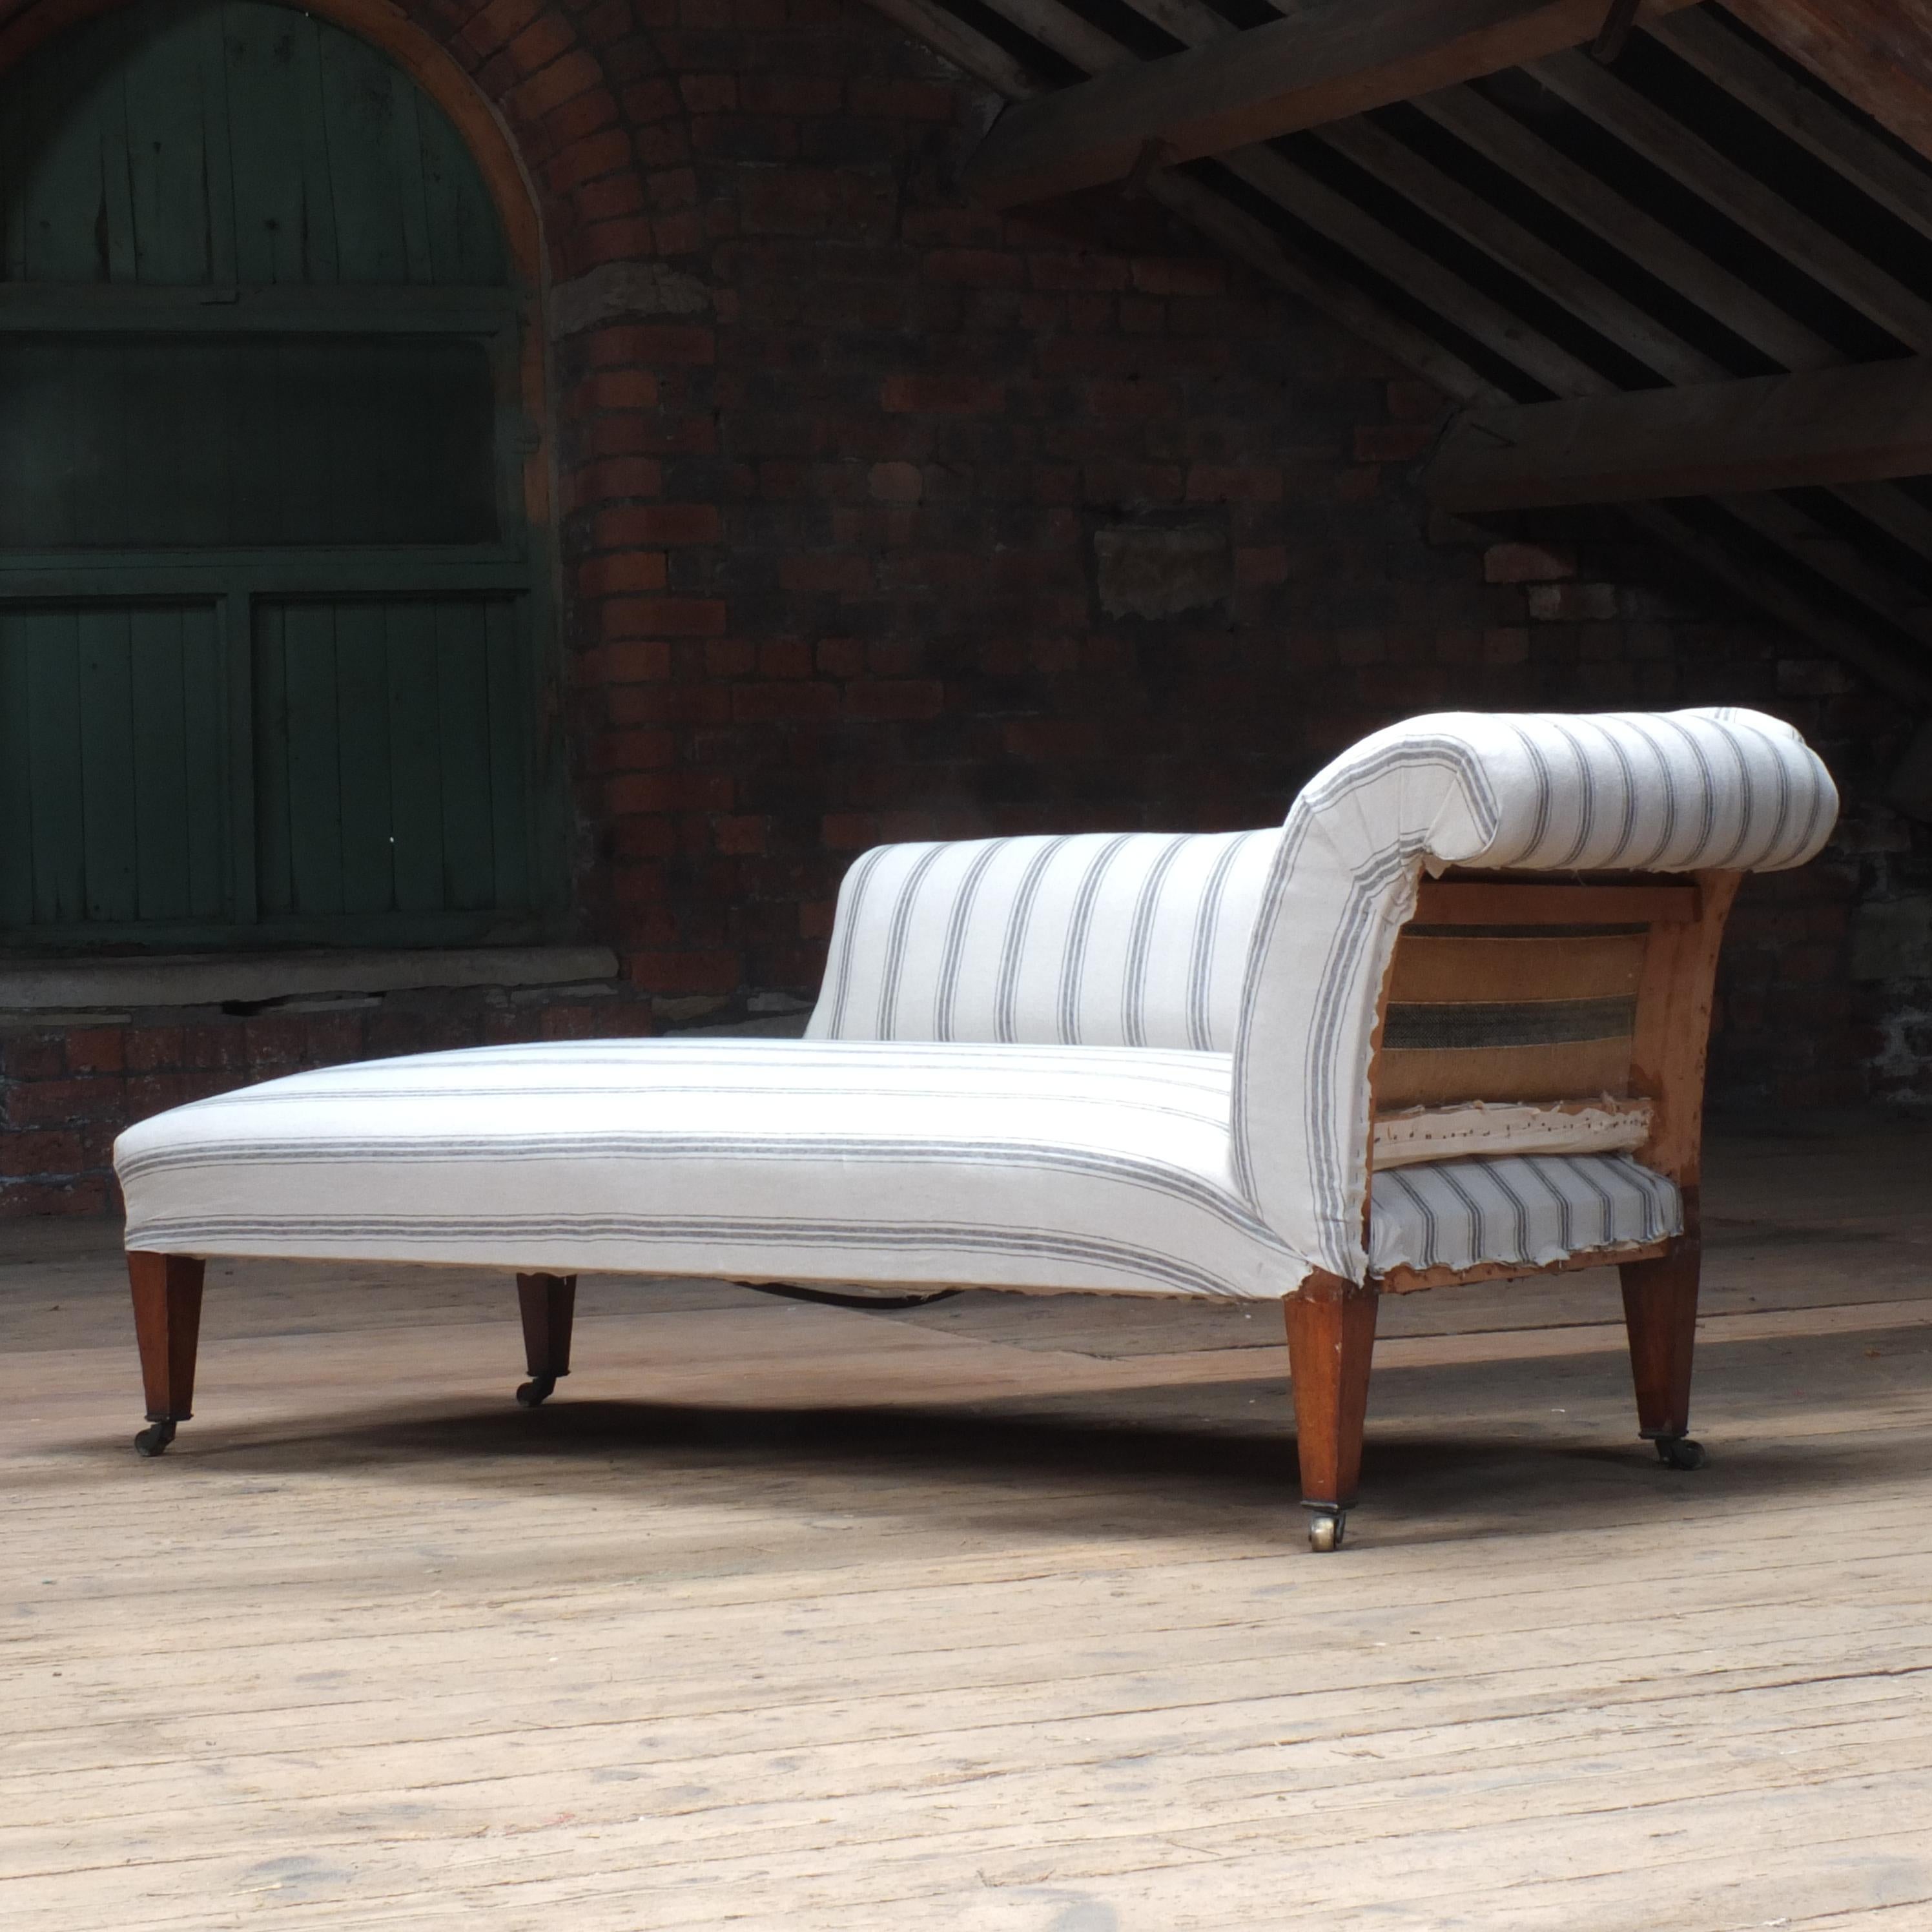 Antique 19th Century English Country House Chaise Lounge C1890 2